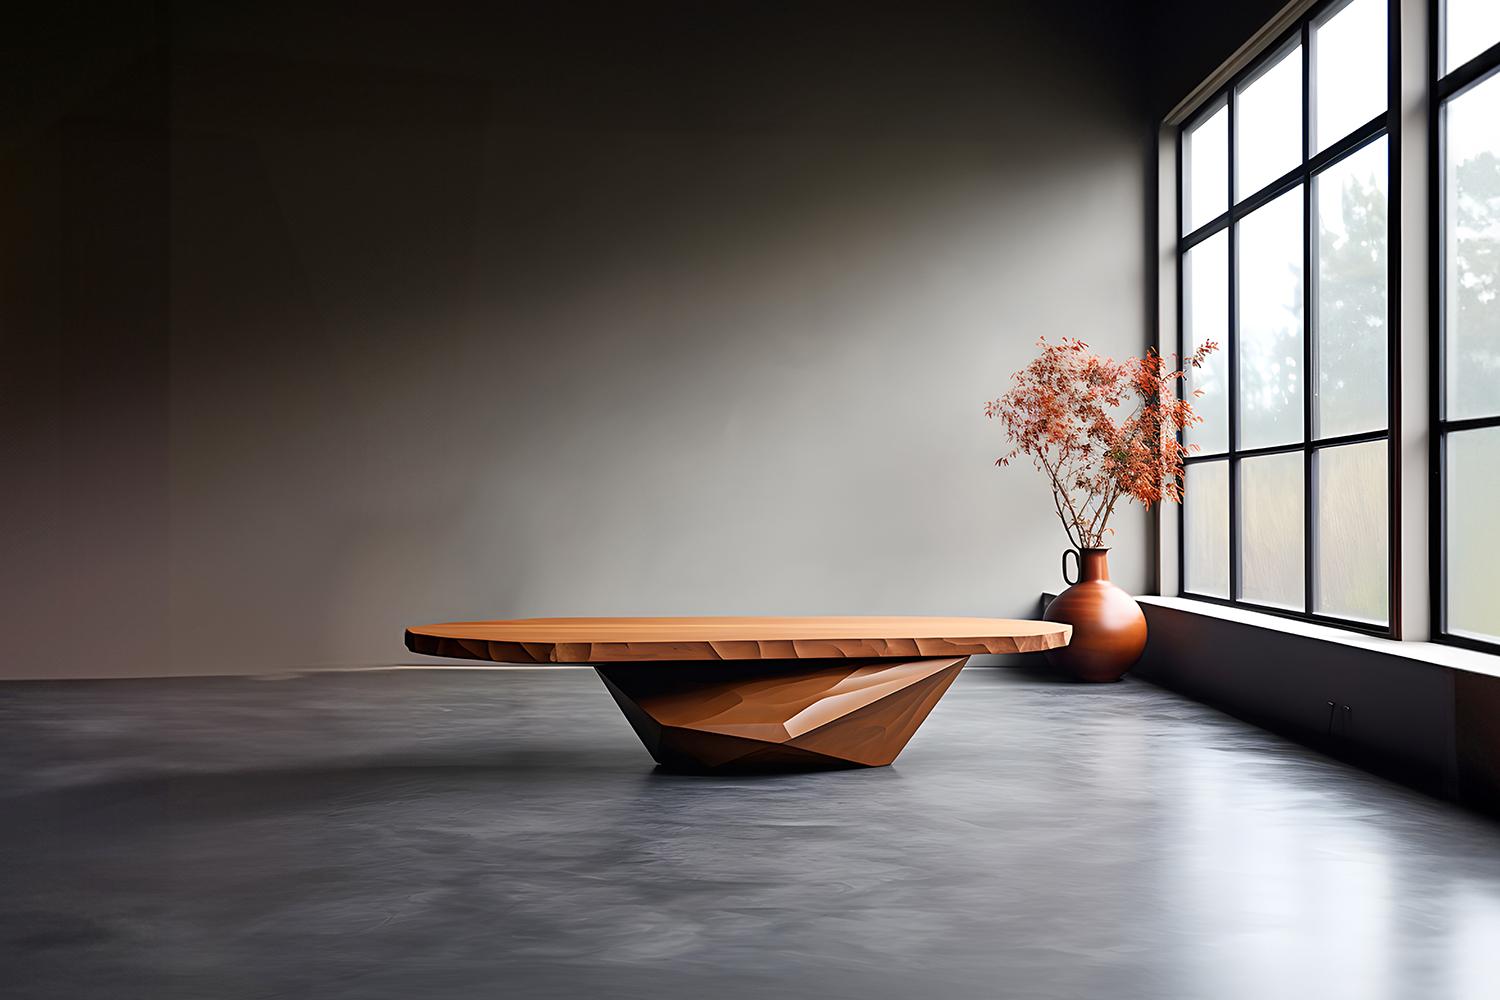 Sculptural Coffee Table Made of Solid Wood, Center Table Solace S11 by NONO


The Solace table series, designed by Joel Escalona, is a furniture collection that exudes balance and presence, thanks to its sensuous, dense, and irregular shapes. These